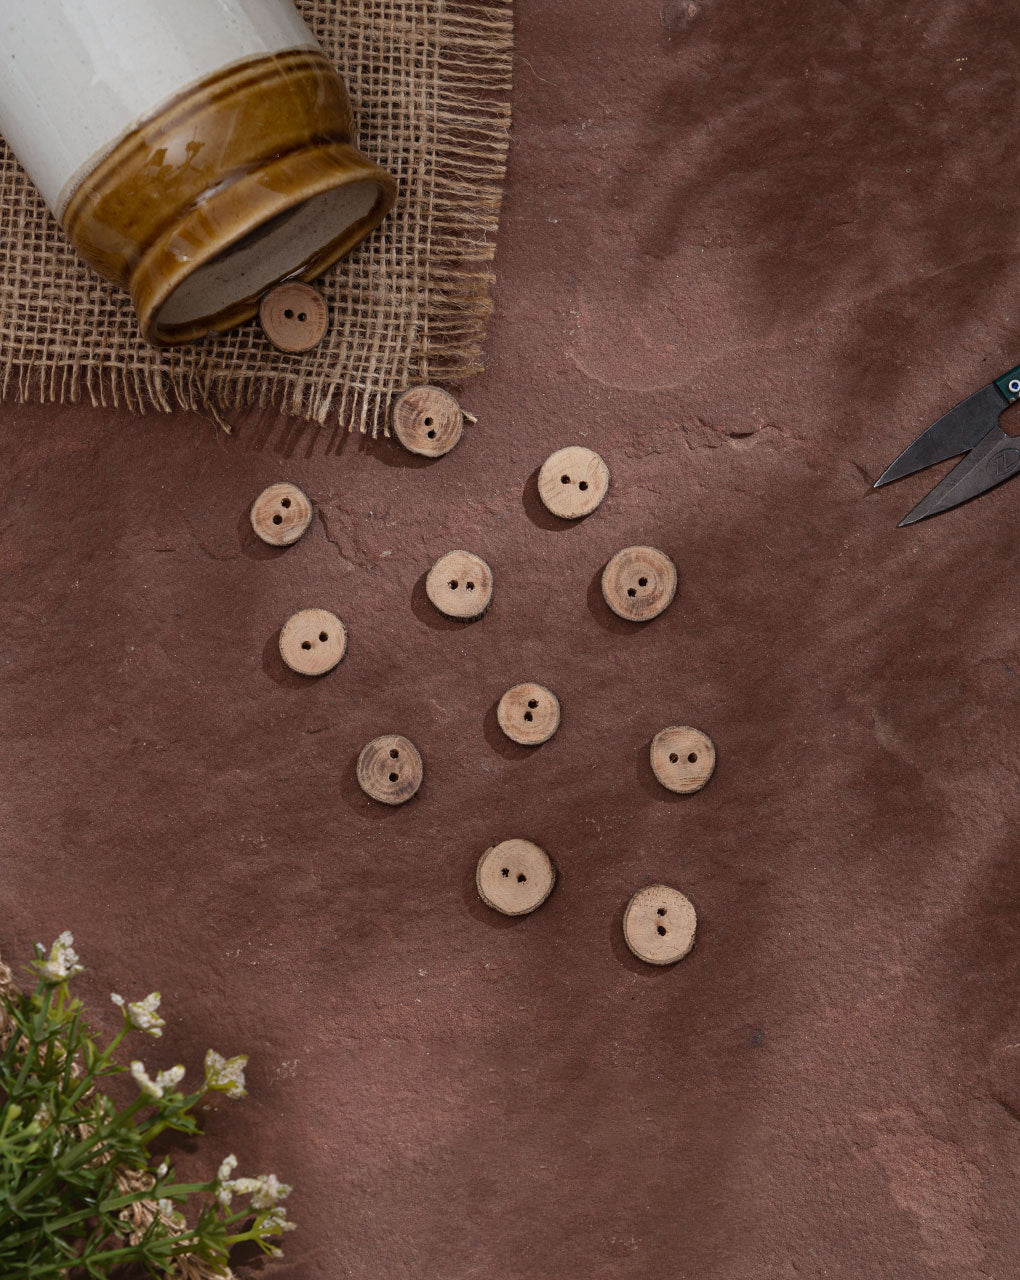 Hand Crafted Wooden Button ( Set Of 5 ) - Fabriclore.com